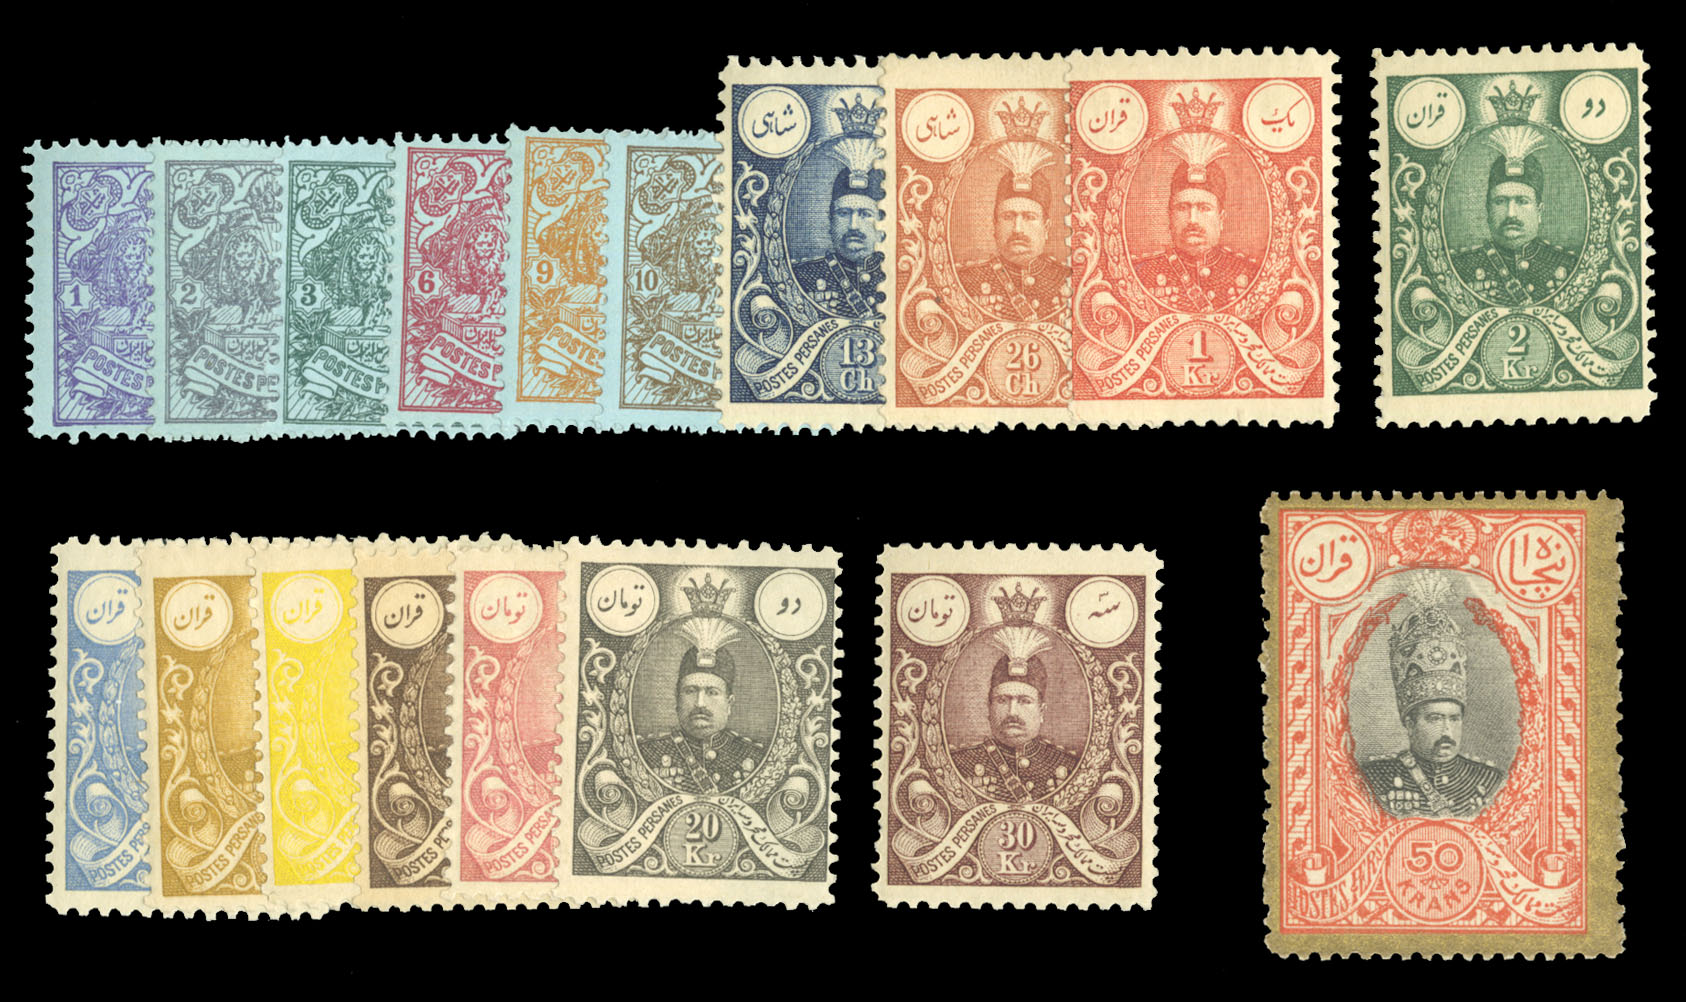 Lot 968 - MONTENEGRO Issued under Italian Occupation  -  Cherrystone Auctions U.S. & Worldwide Stamps & Postal History